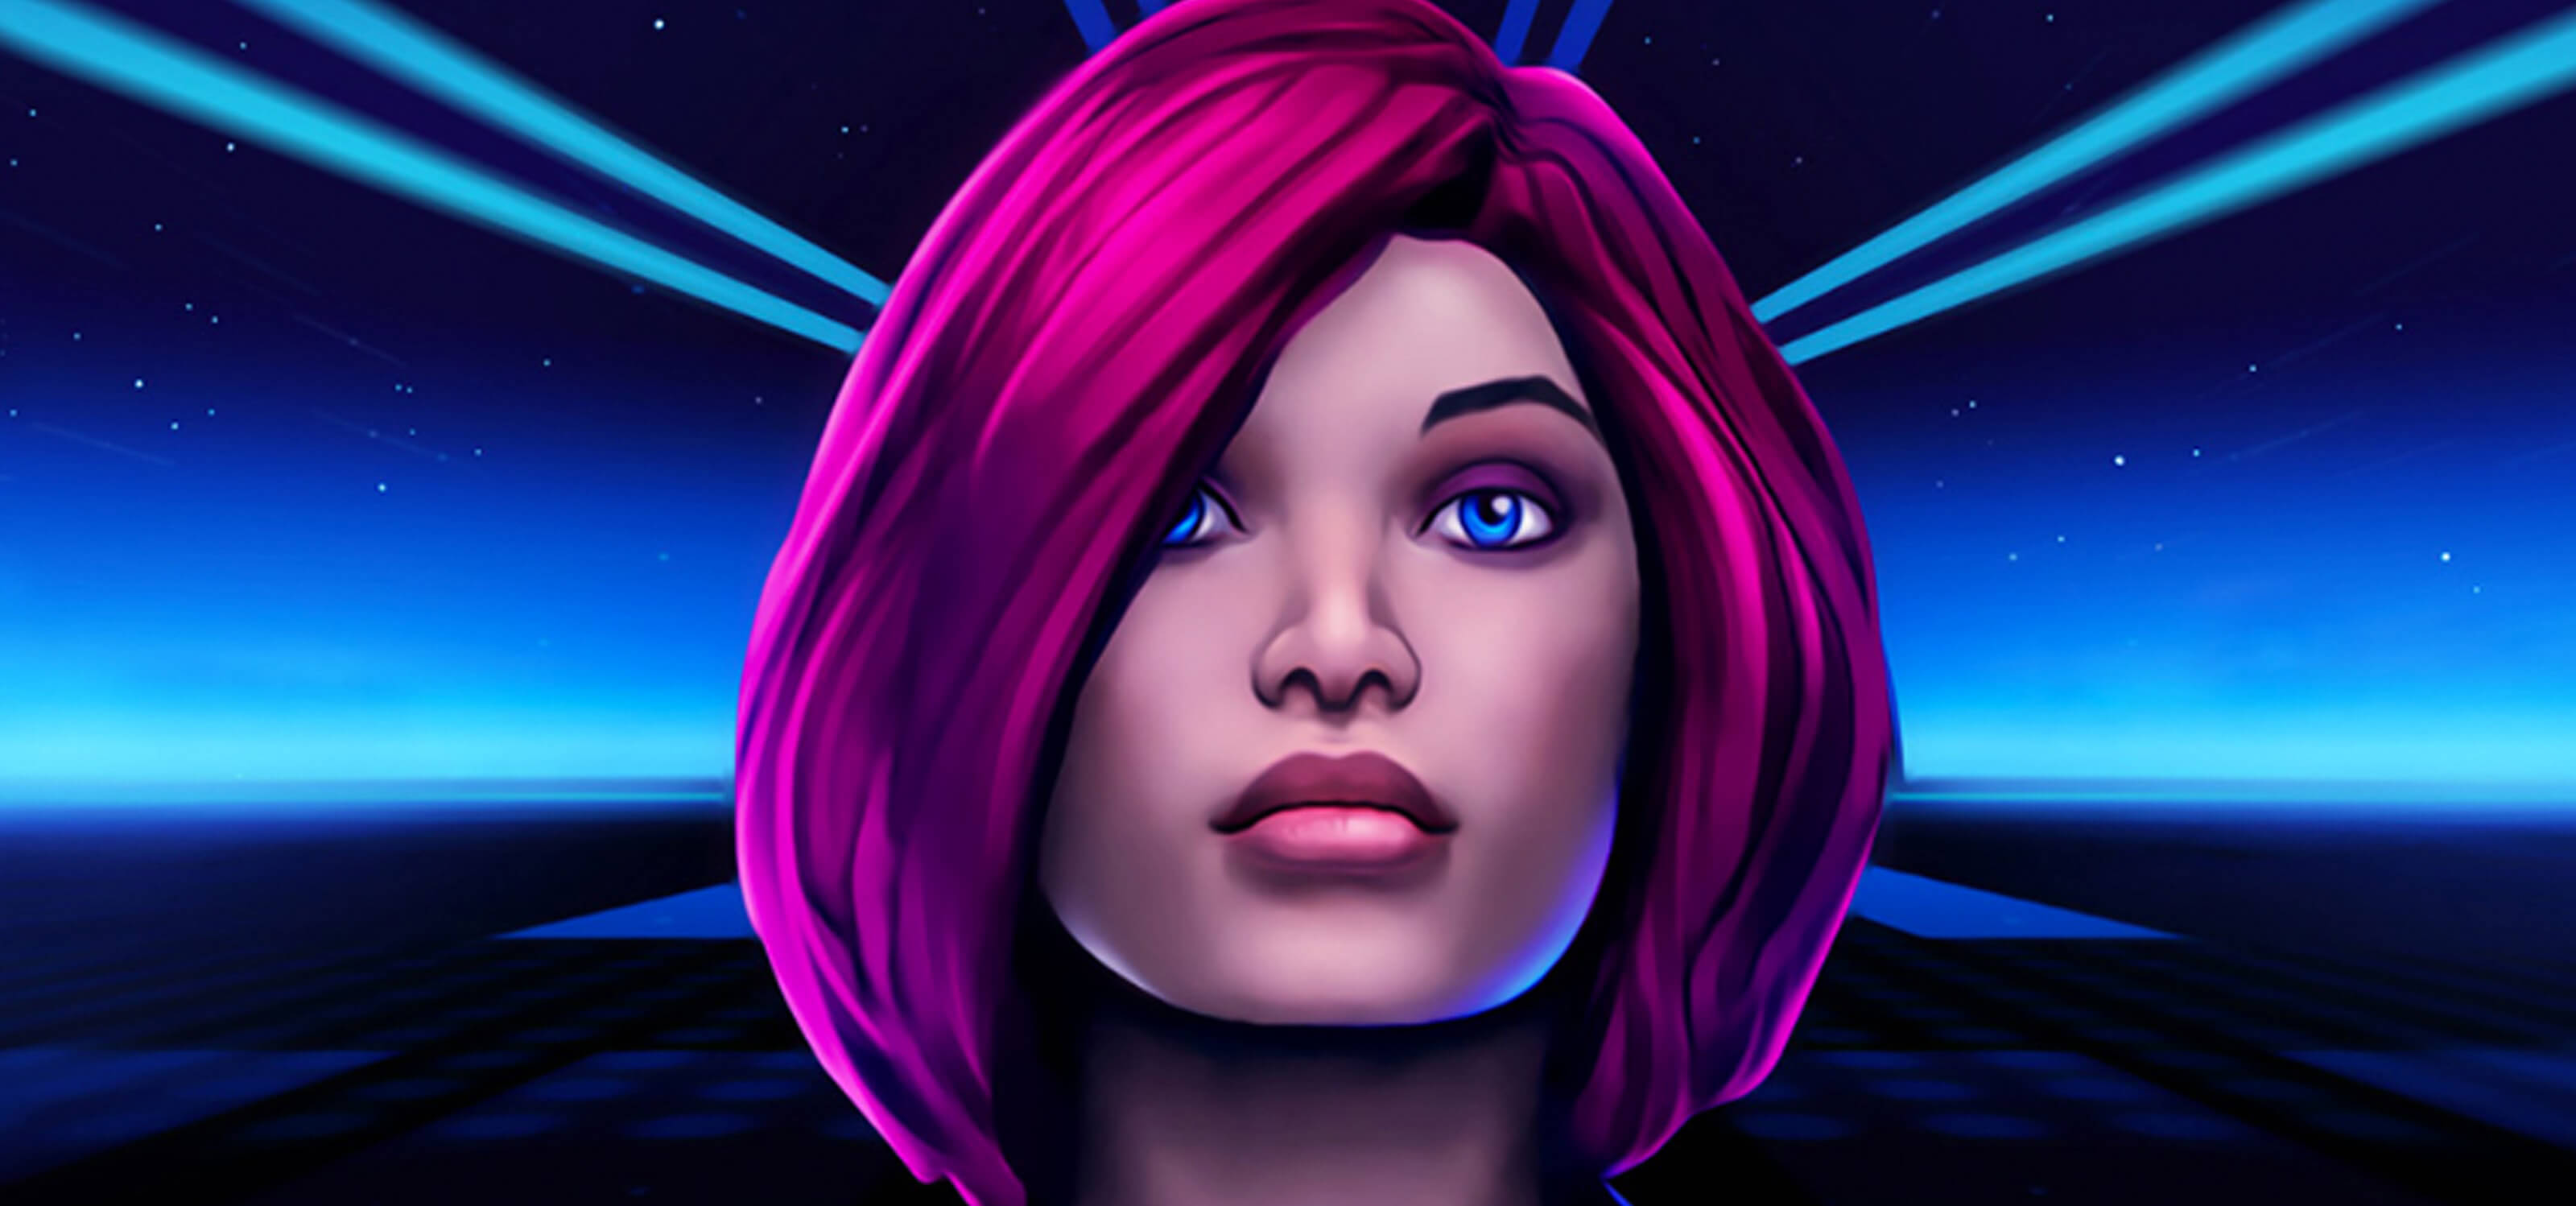 Screenshot from GrooVR featuring a pink-haired female character